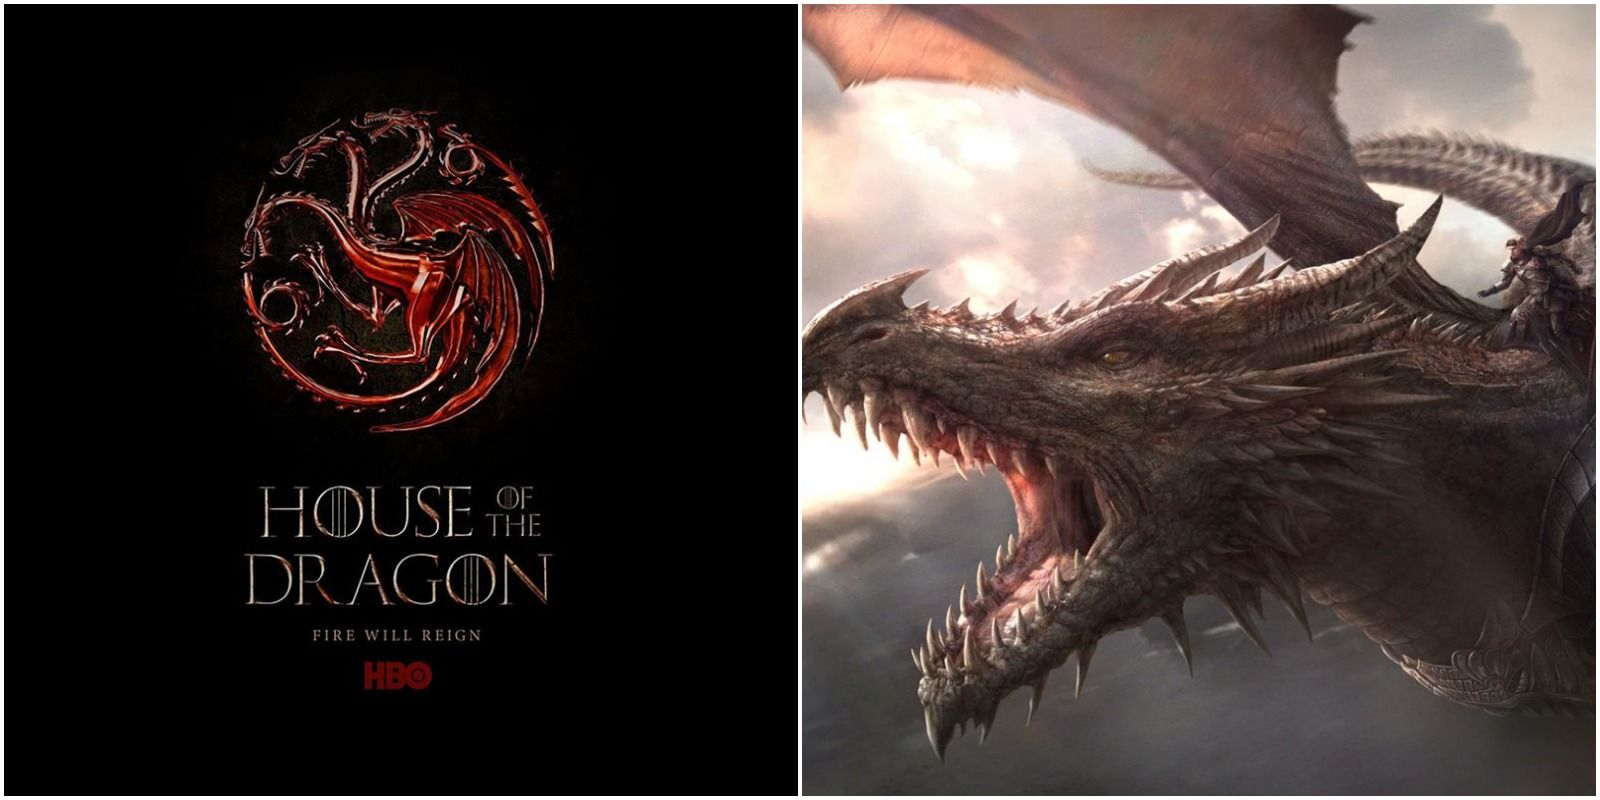 House of the Dragon series for HBO and art of Balerion the Dread by Jordi Gonzalez Escamilla